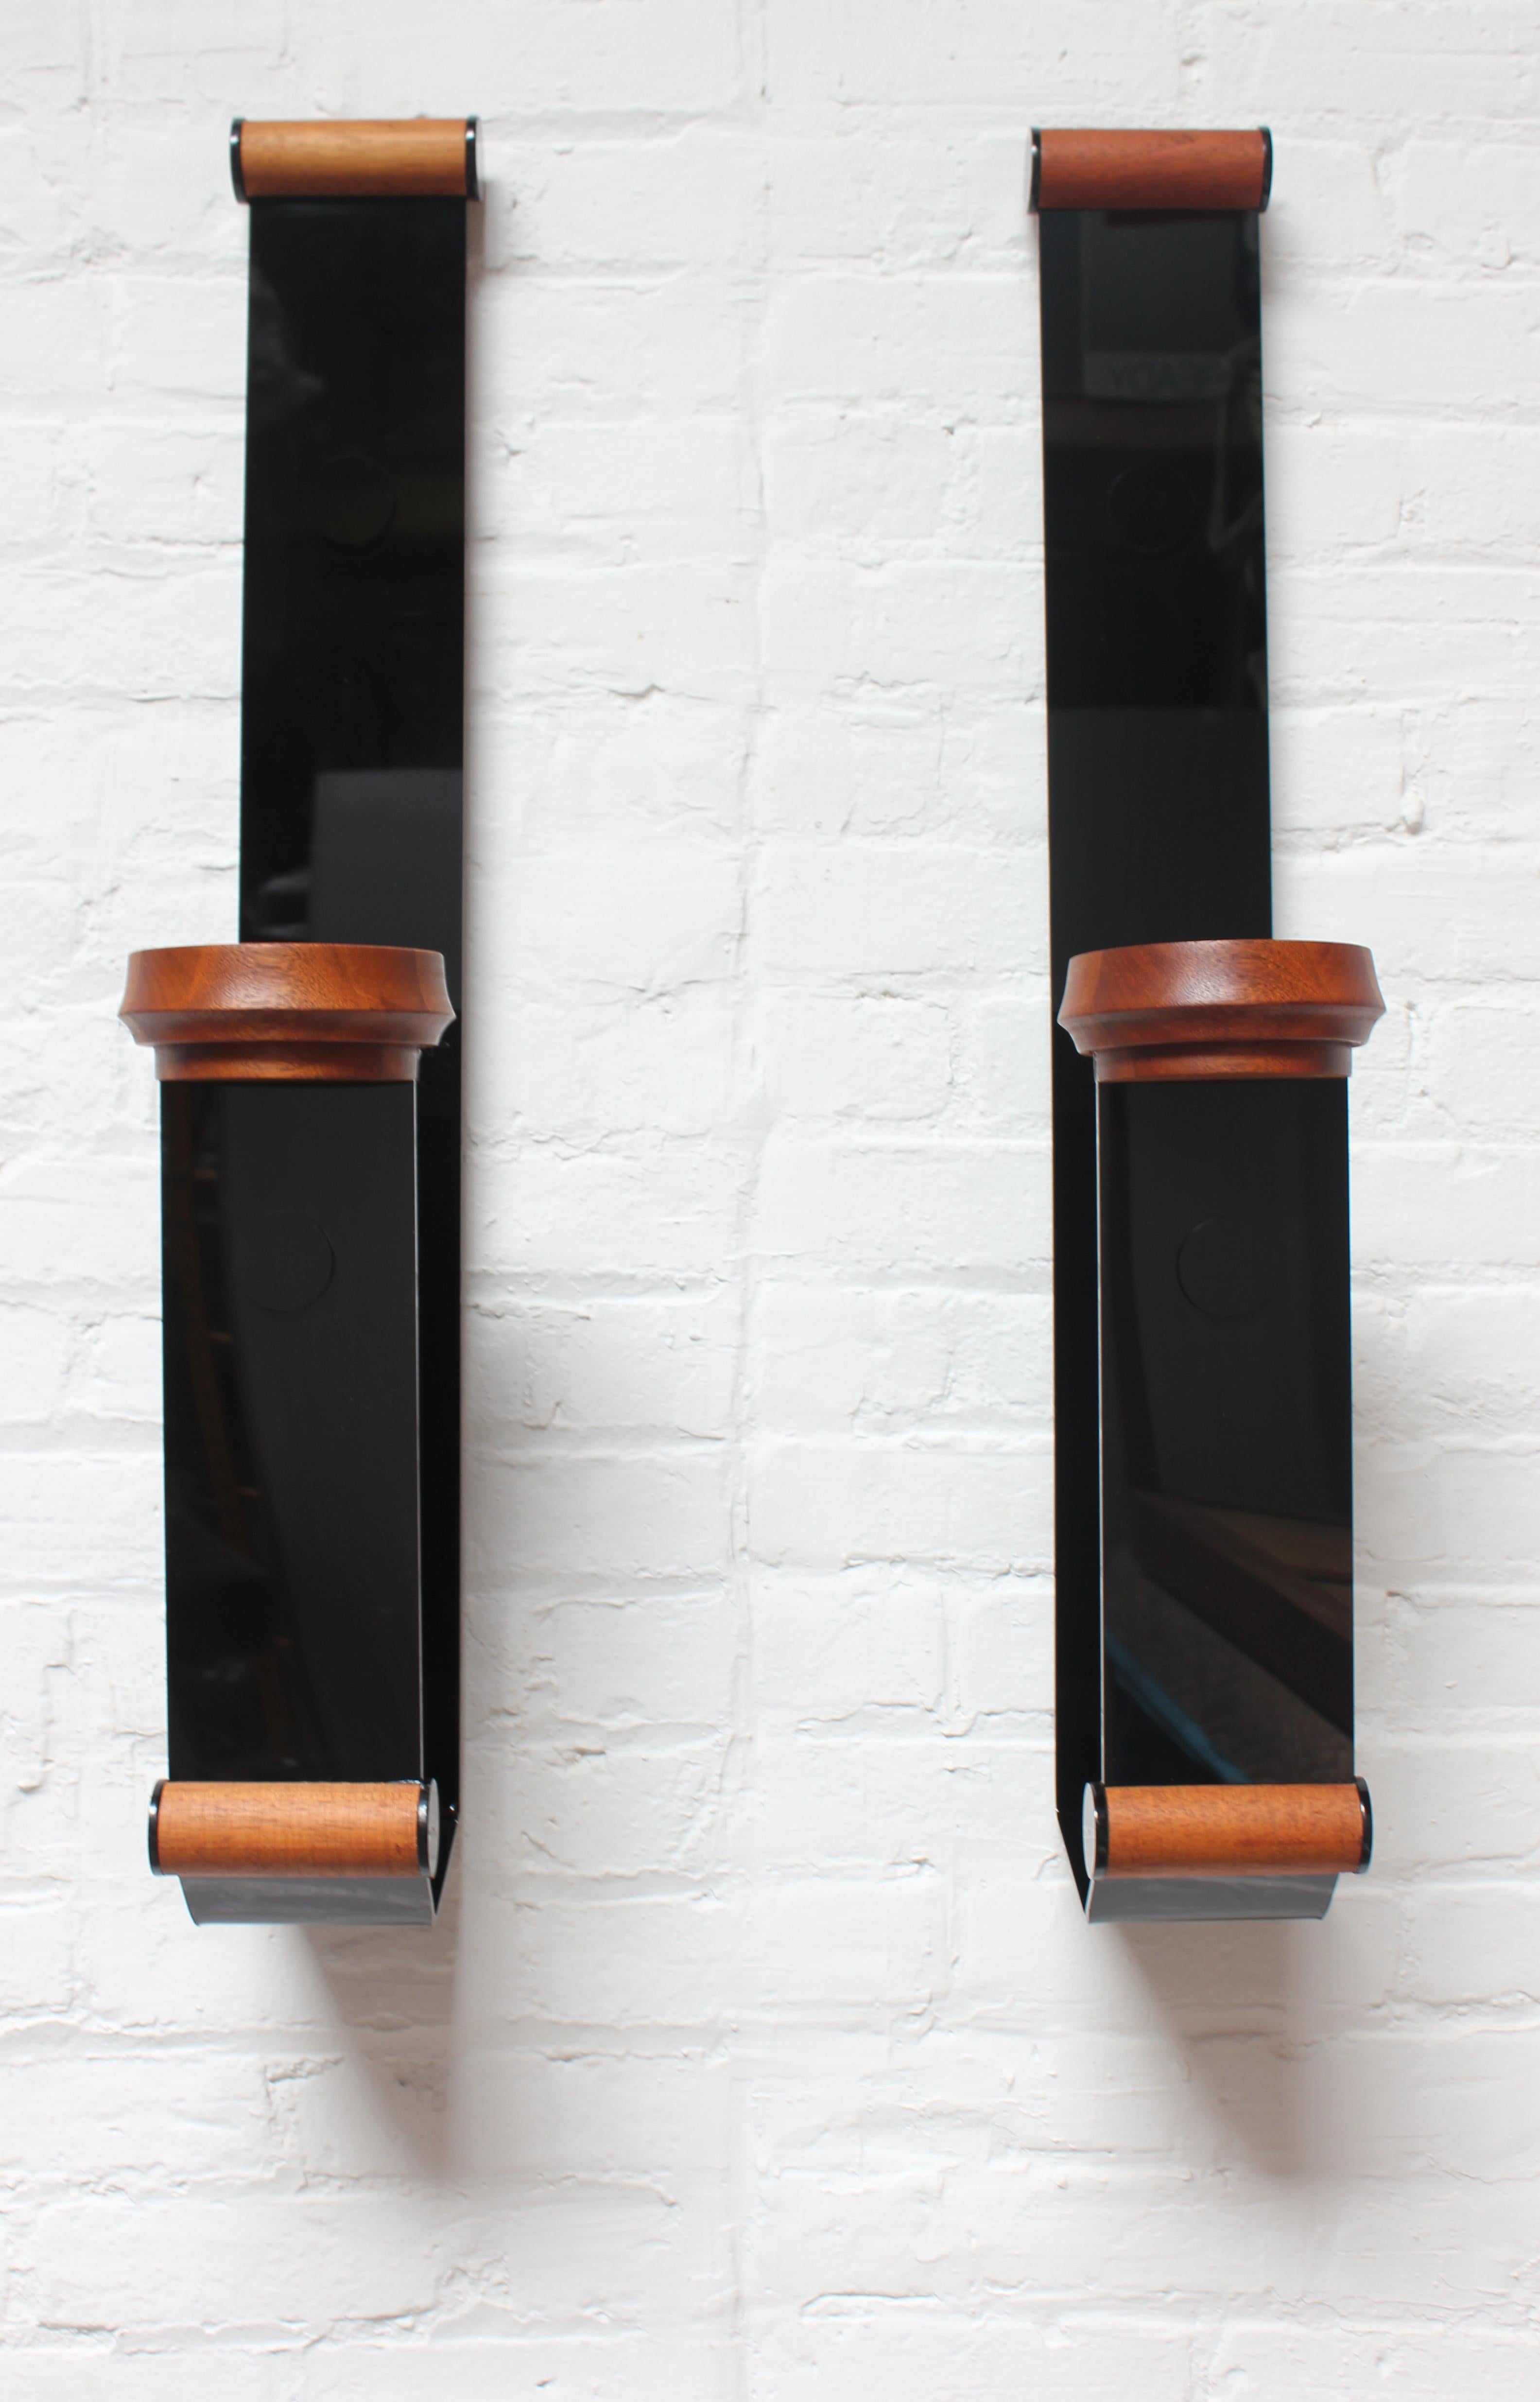 Unique pair of black acrylic candle holders / wall scones with teak holders (ca. 1970s).
Impressive size: H: 31